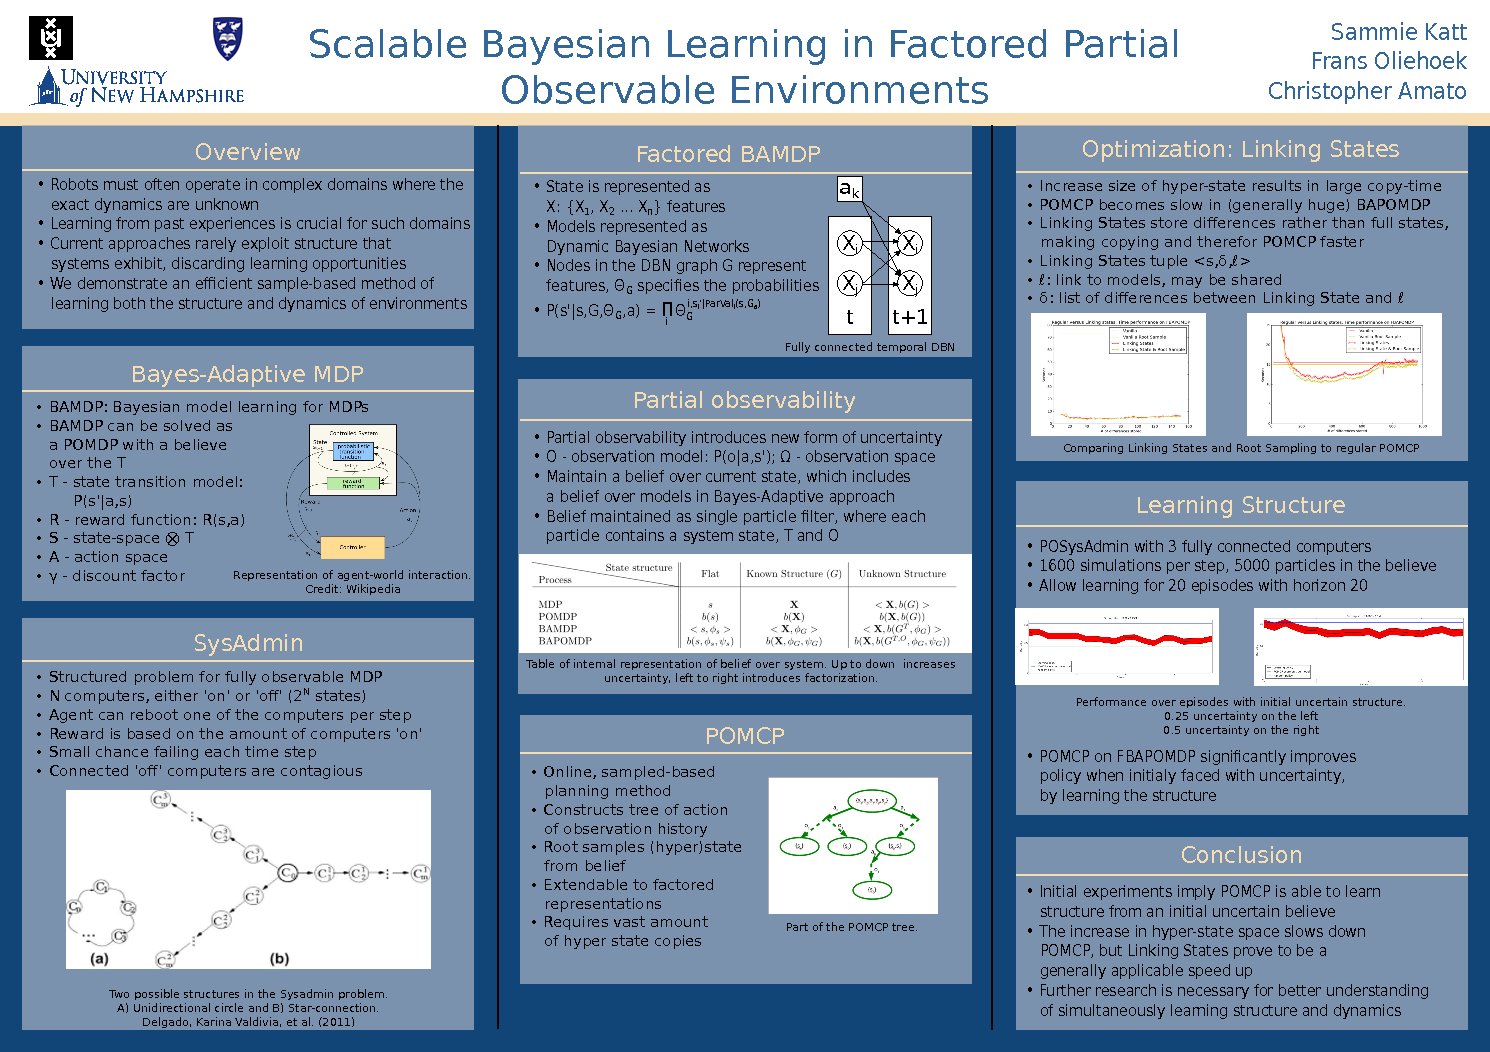 Scalable Bayesian Learning In Factored Partial Observable Environments by skat